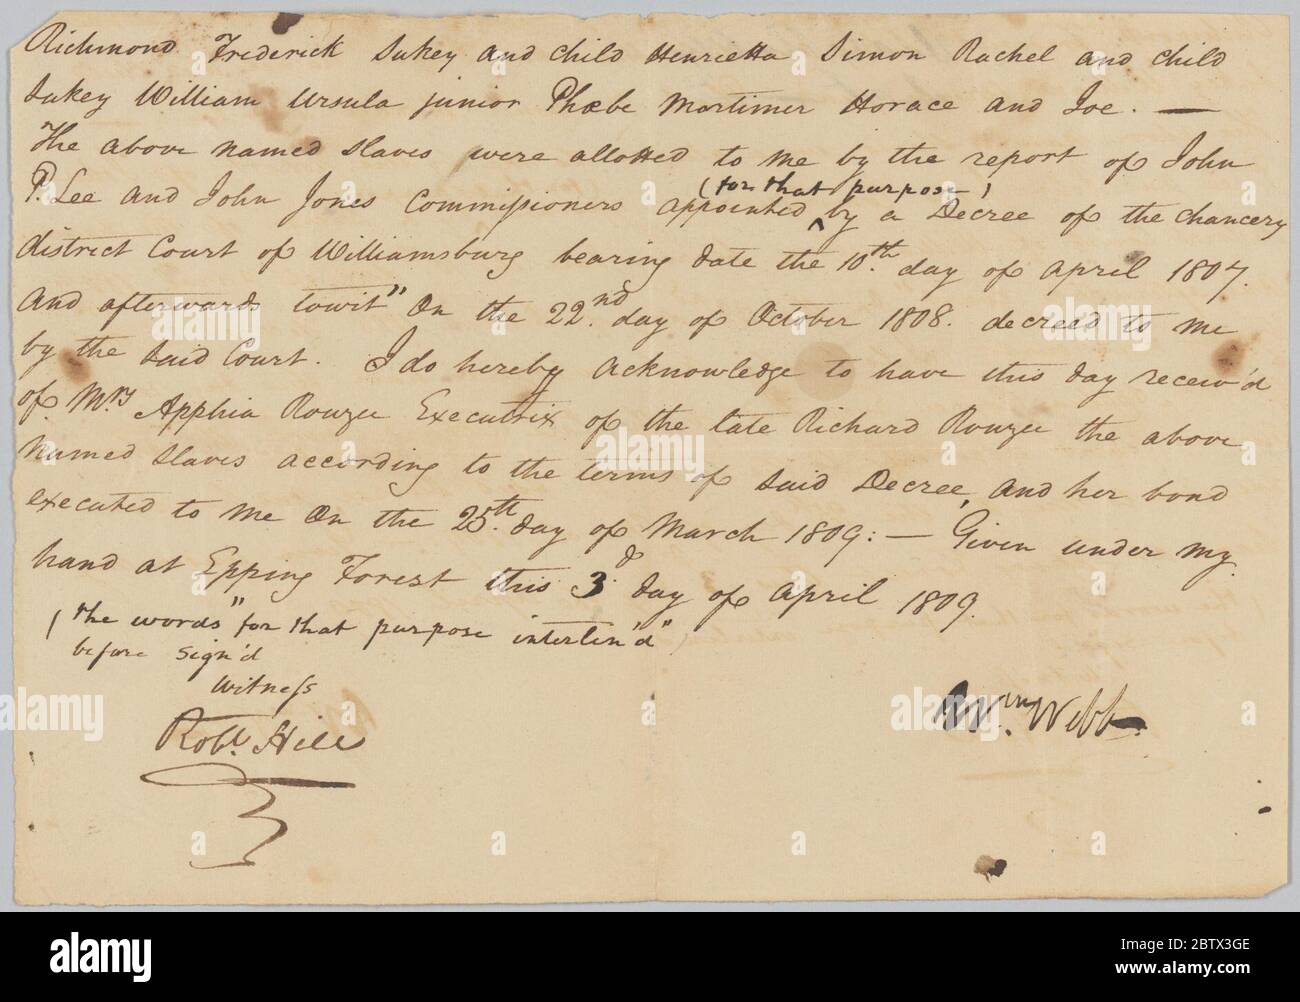 Deed of transfer of enslaved persons from the estate of Richard Rouzee. This document is from a collection of financial papers related to the plantation operations of several generations of the Rouzee Family in Essex County, Virginia. Stock Photo